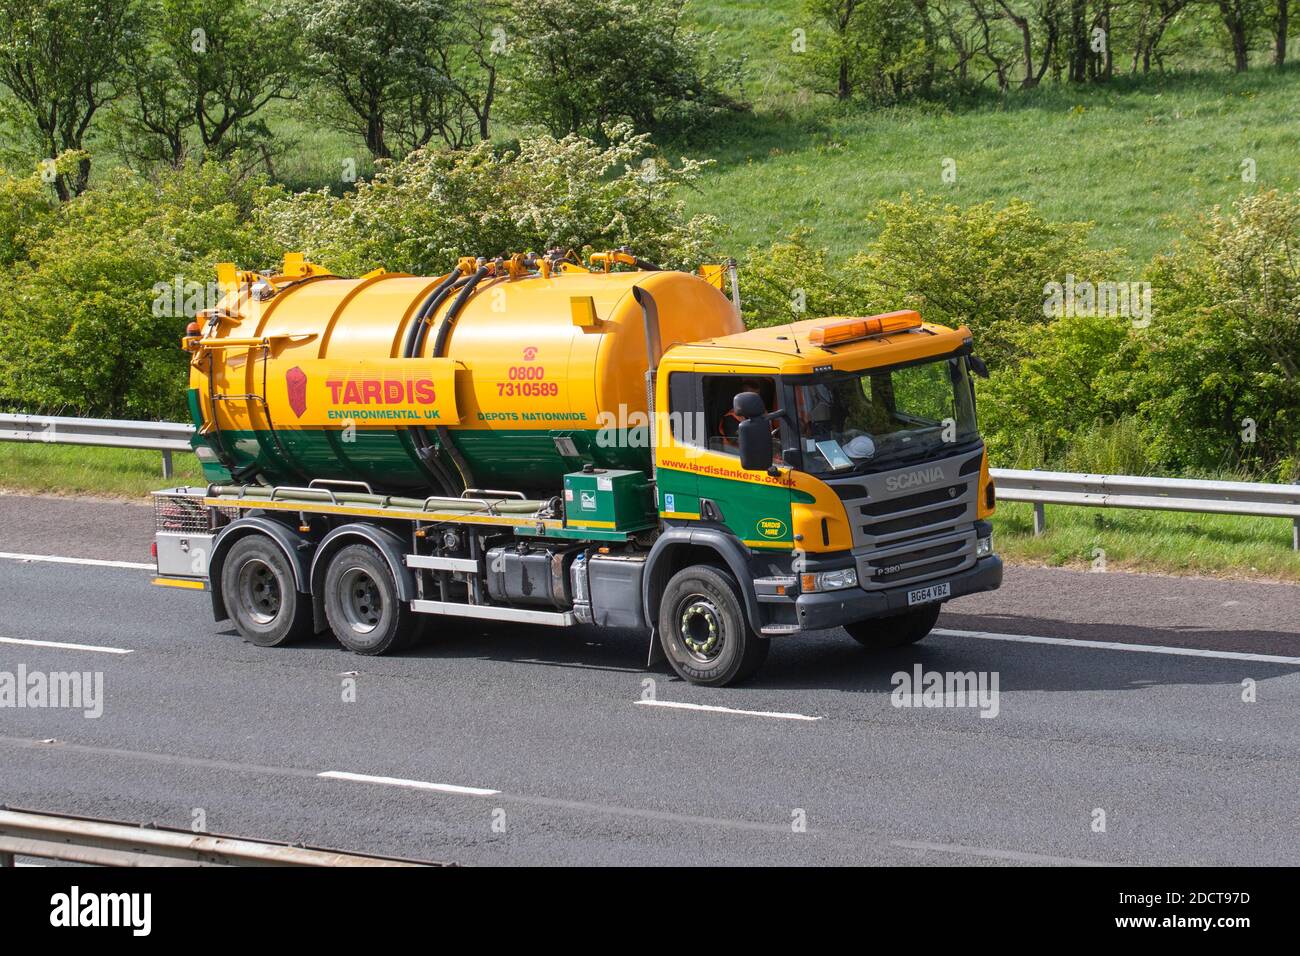 Tardis Tankers green yellow; Haulage delivery trucks, lorry, transportation, truck, cargo carrier, Scania vehicle, European commercial transport, industry, M61 at Manchester, UK Stock Photo